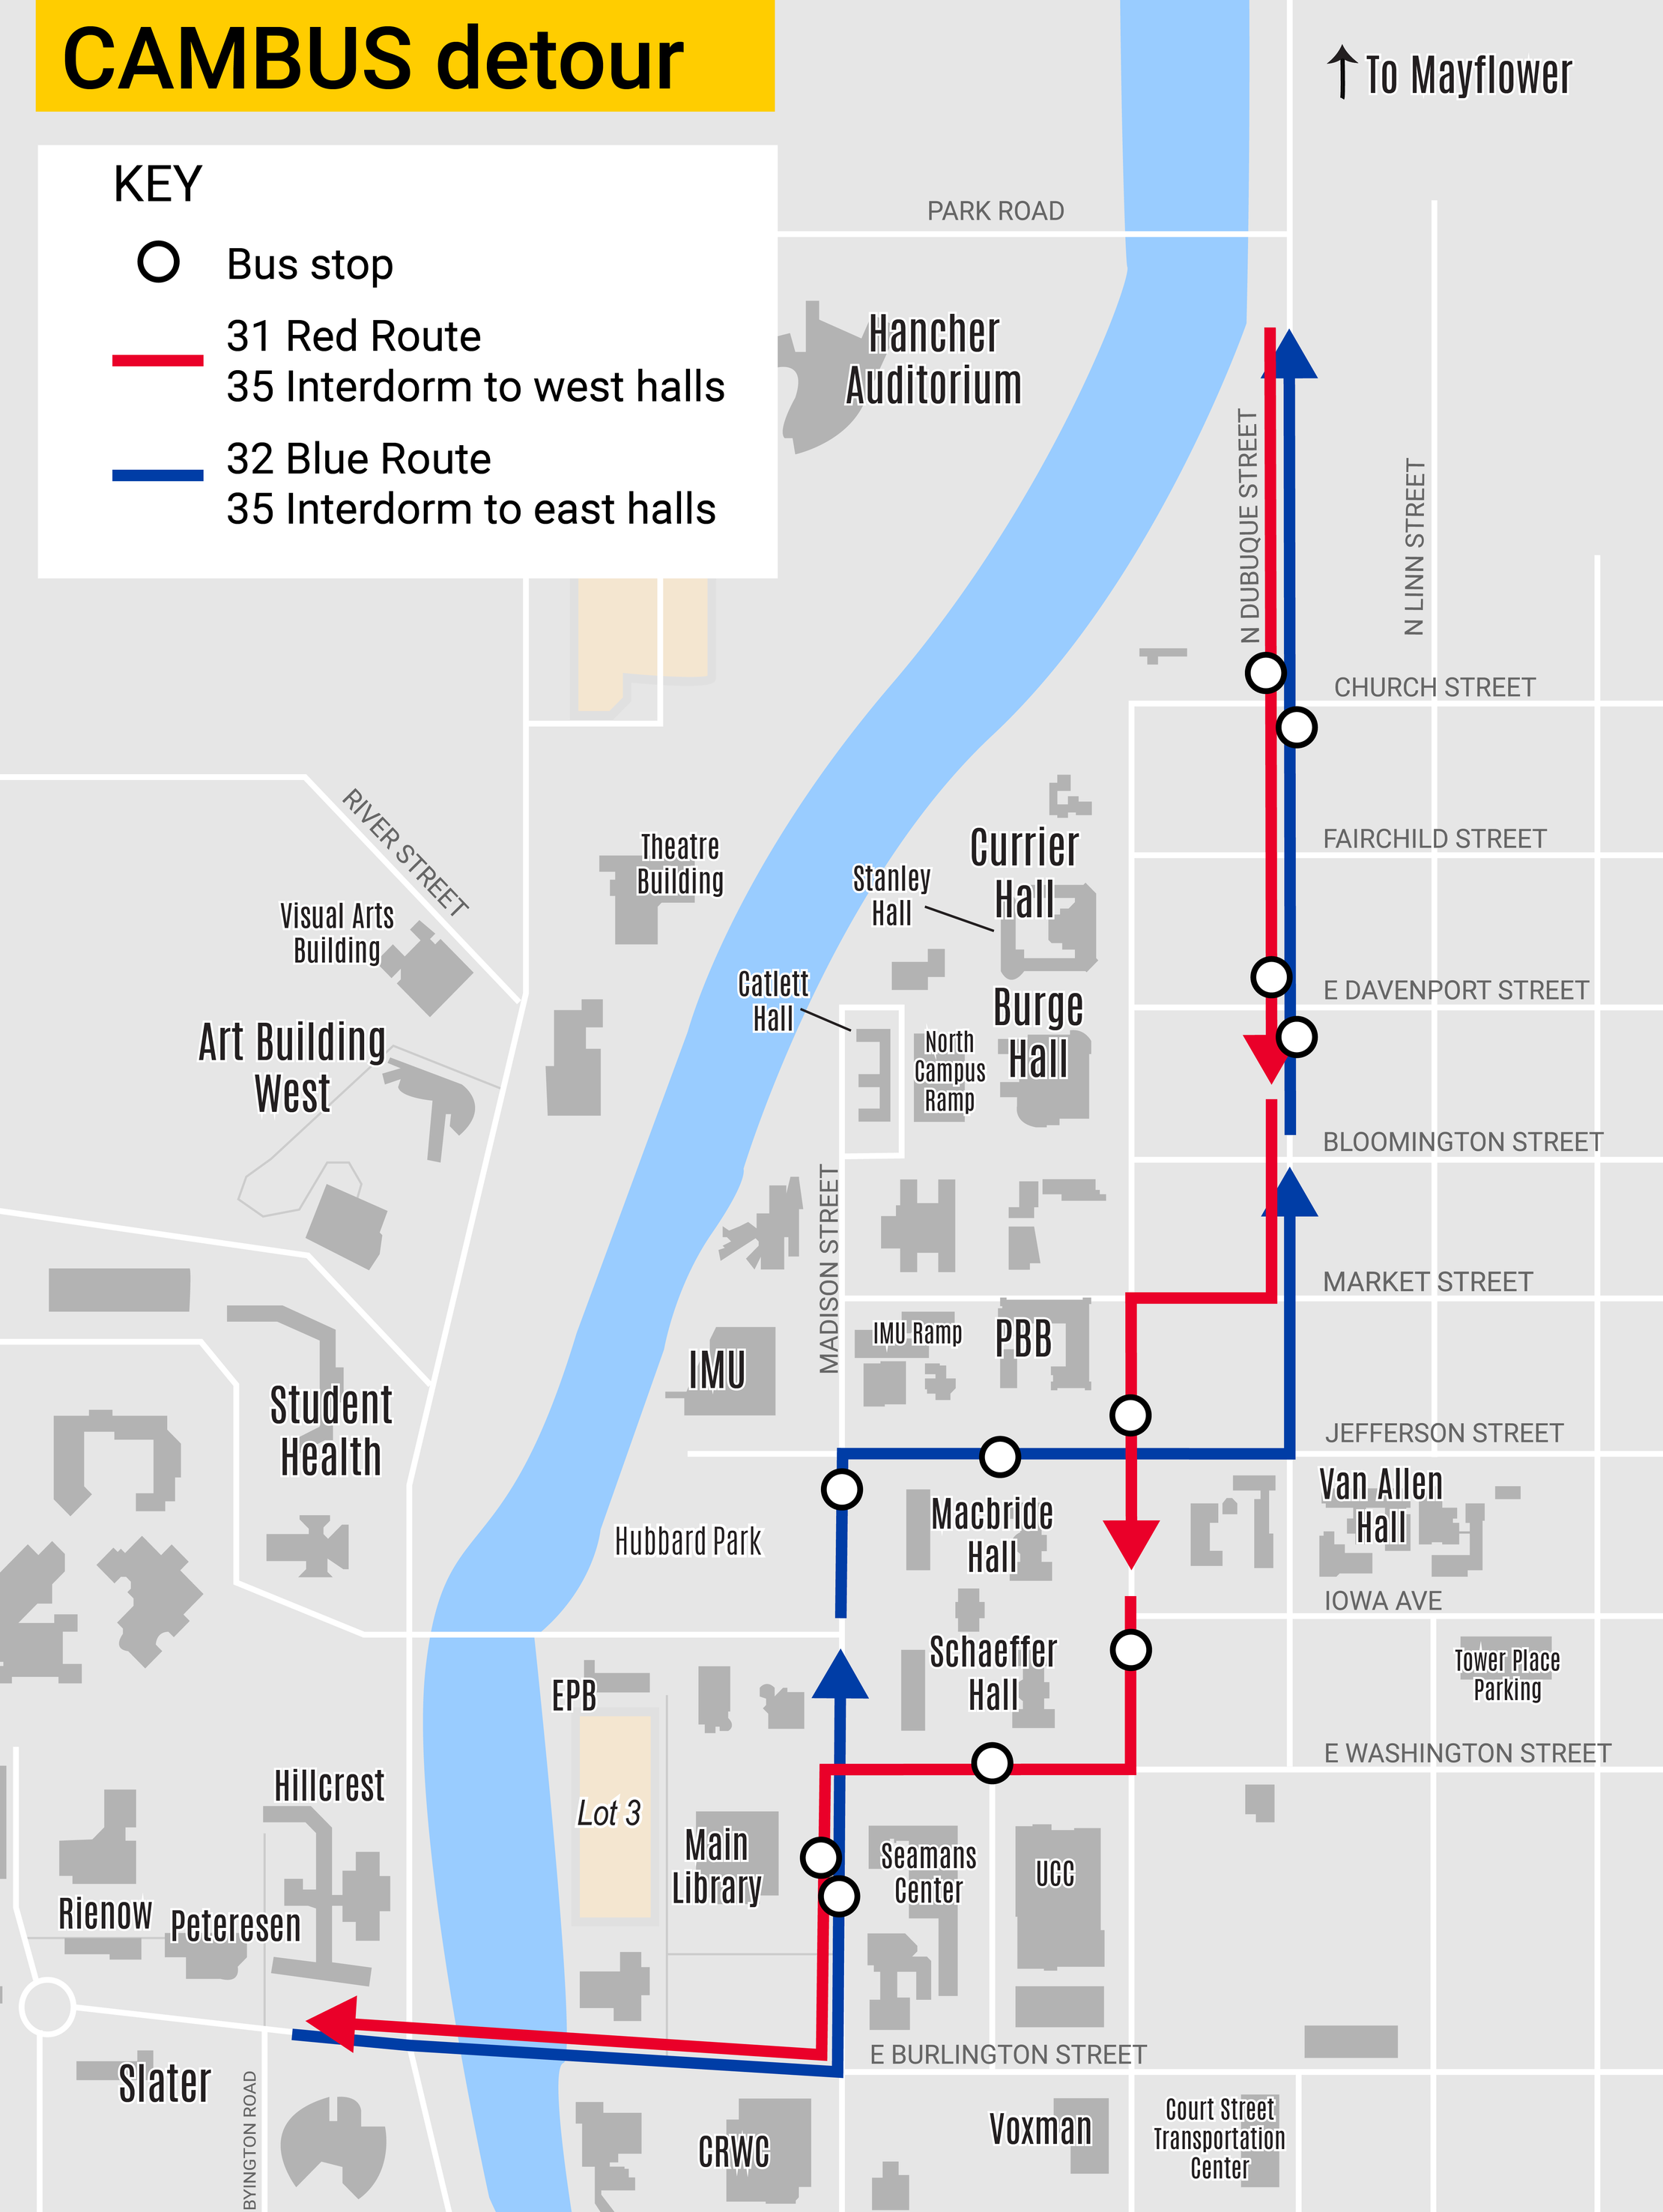 map of cambus routs 31, 32, 35 detoured